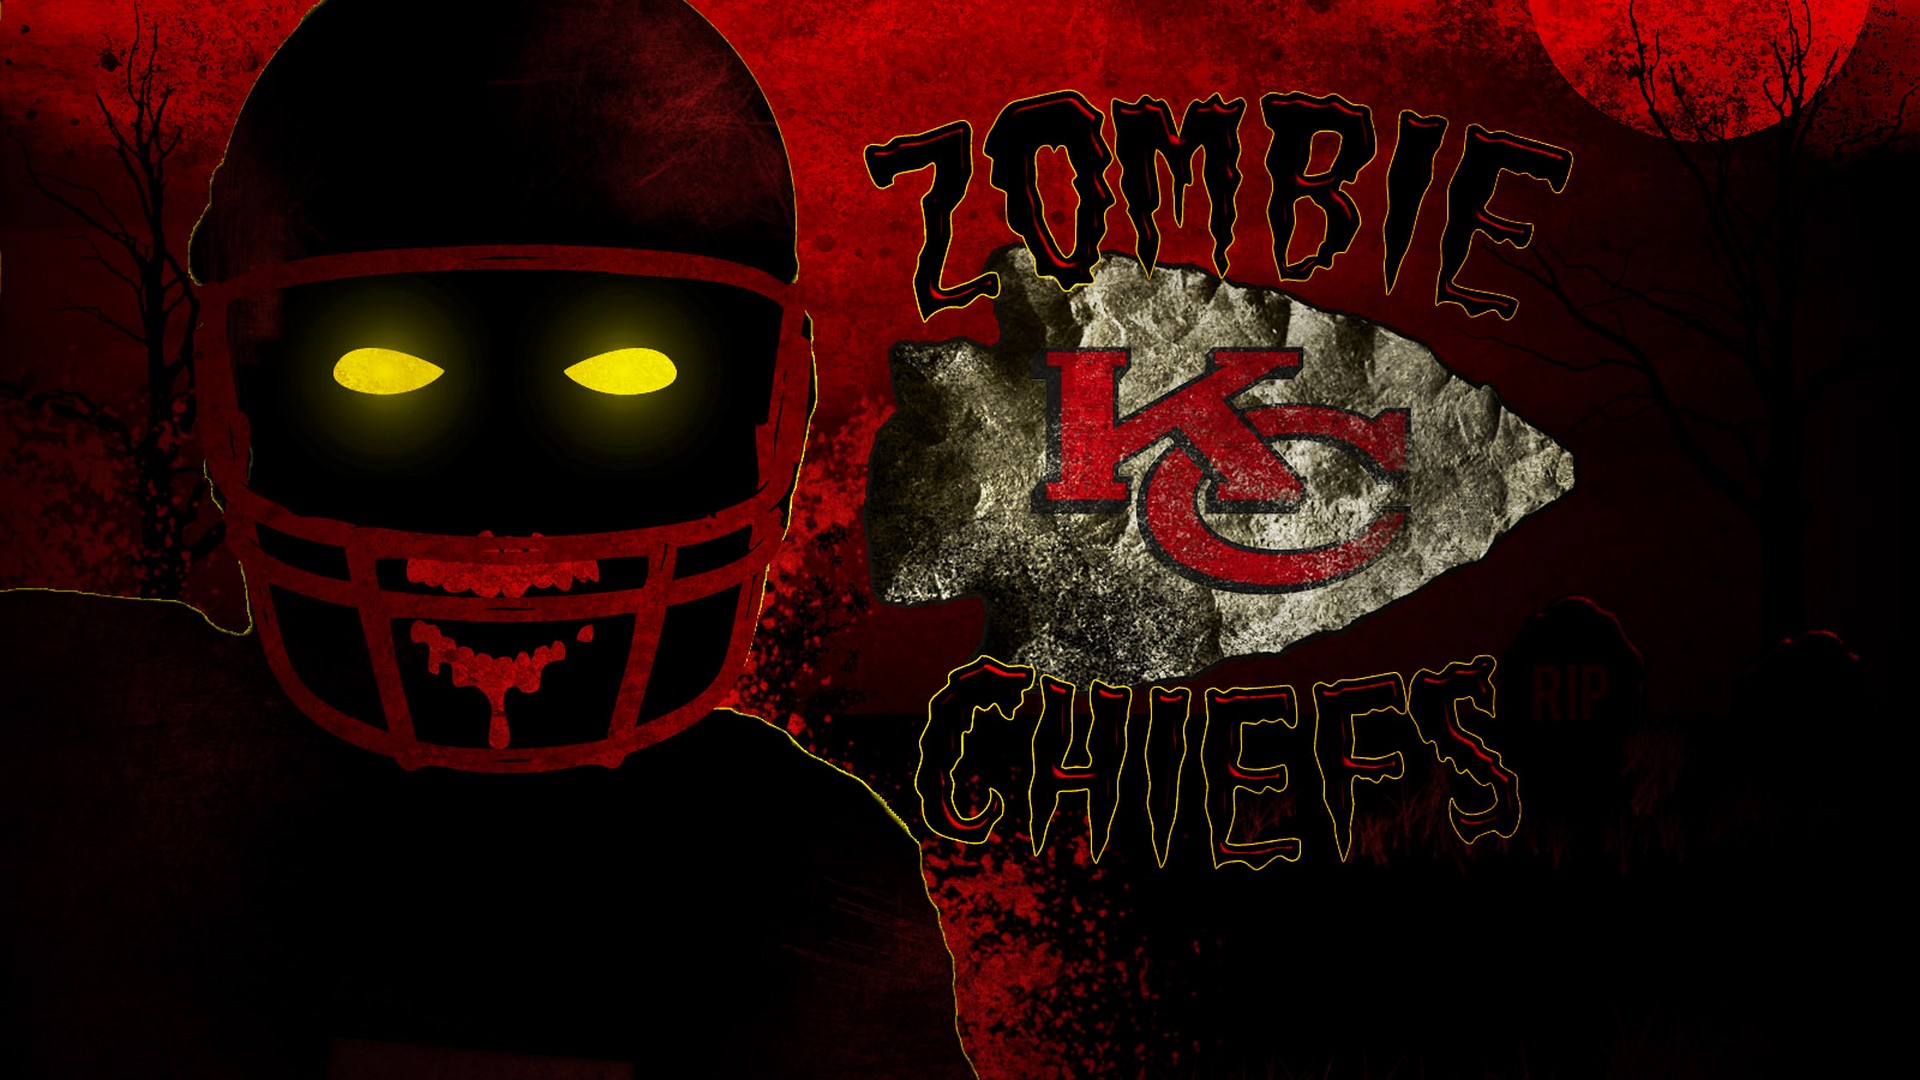 Kansas City Chiefs Wallpaper For Mac With Resolution 1920X1080 pixel. You can make this wallpaper for your Mac or Windows Desktop Background, iPhone, Android or Tablet and another Smartphone device for free